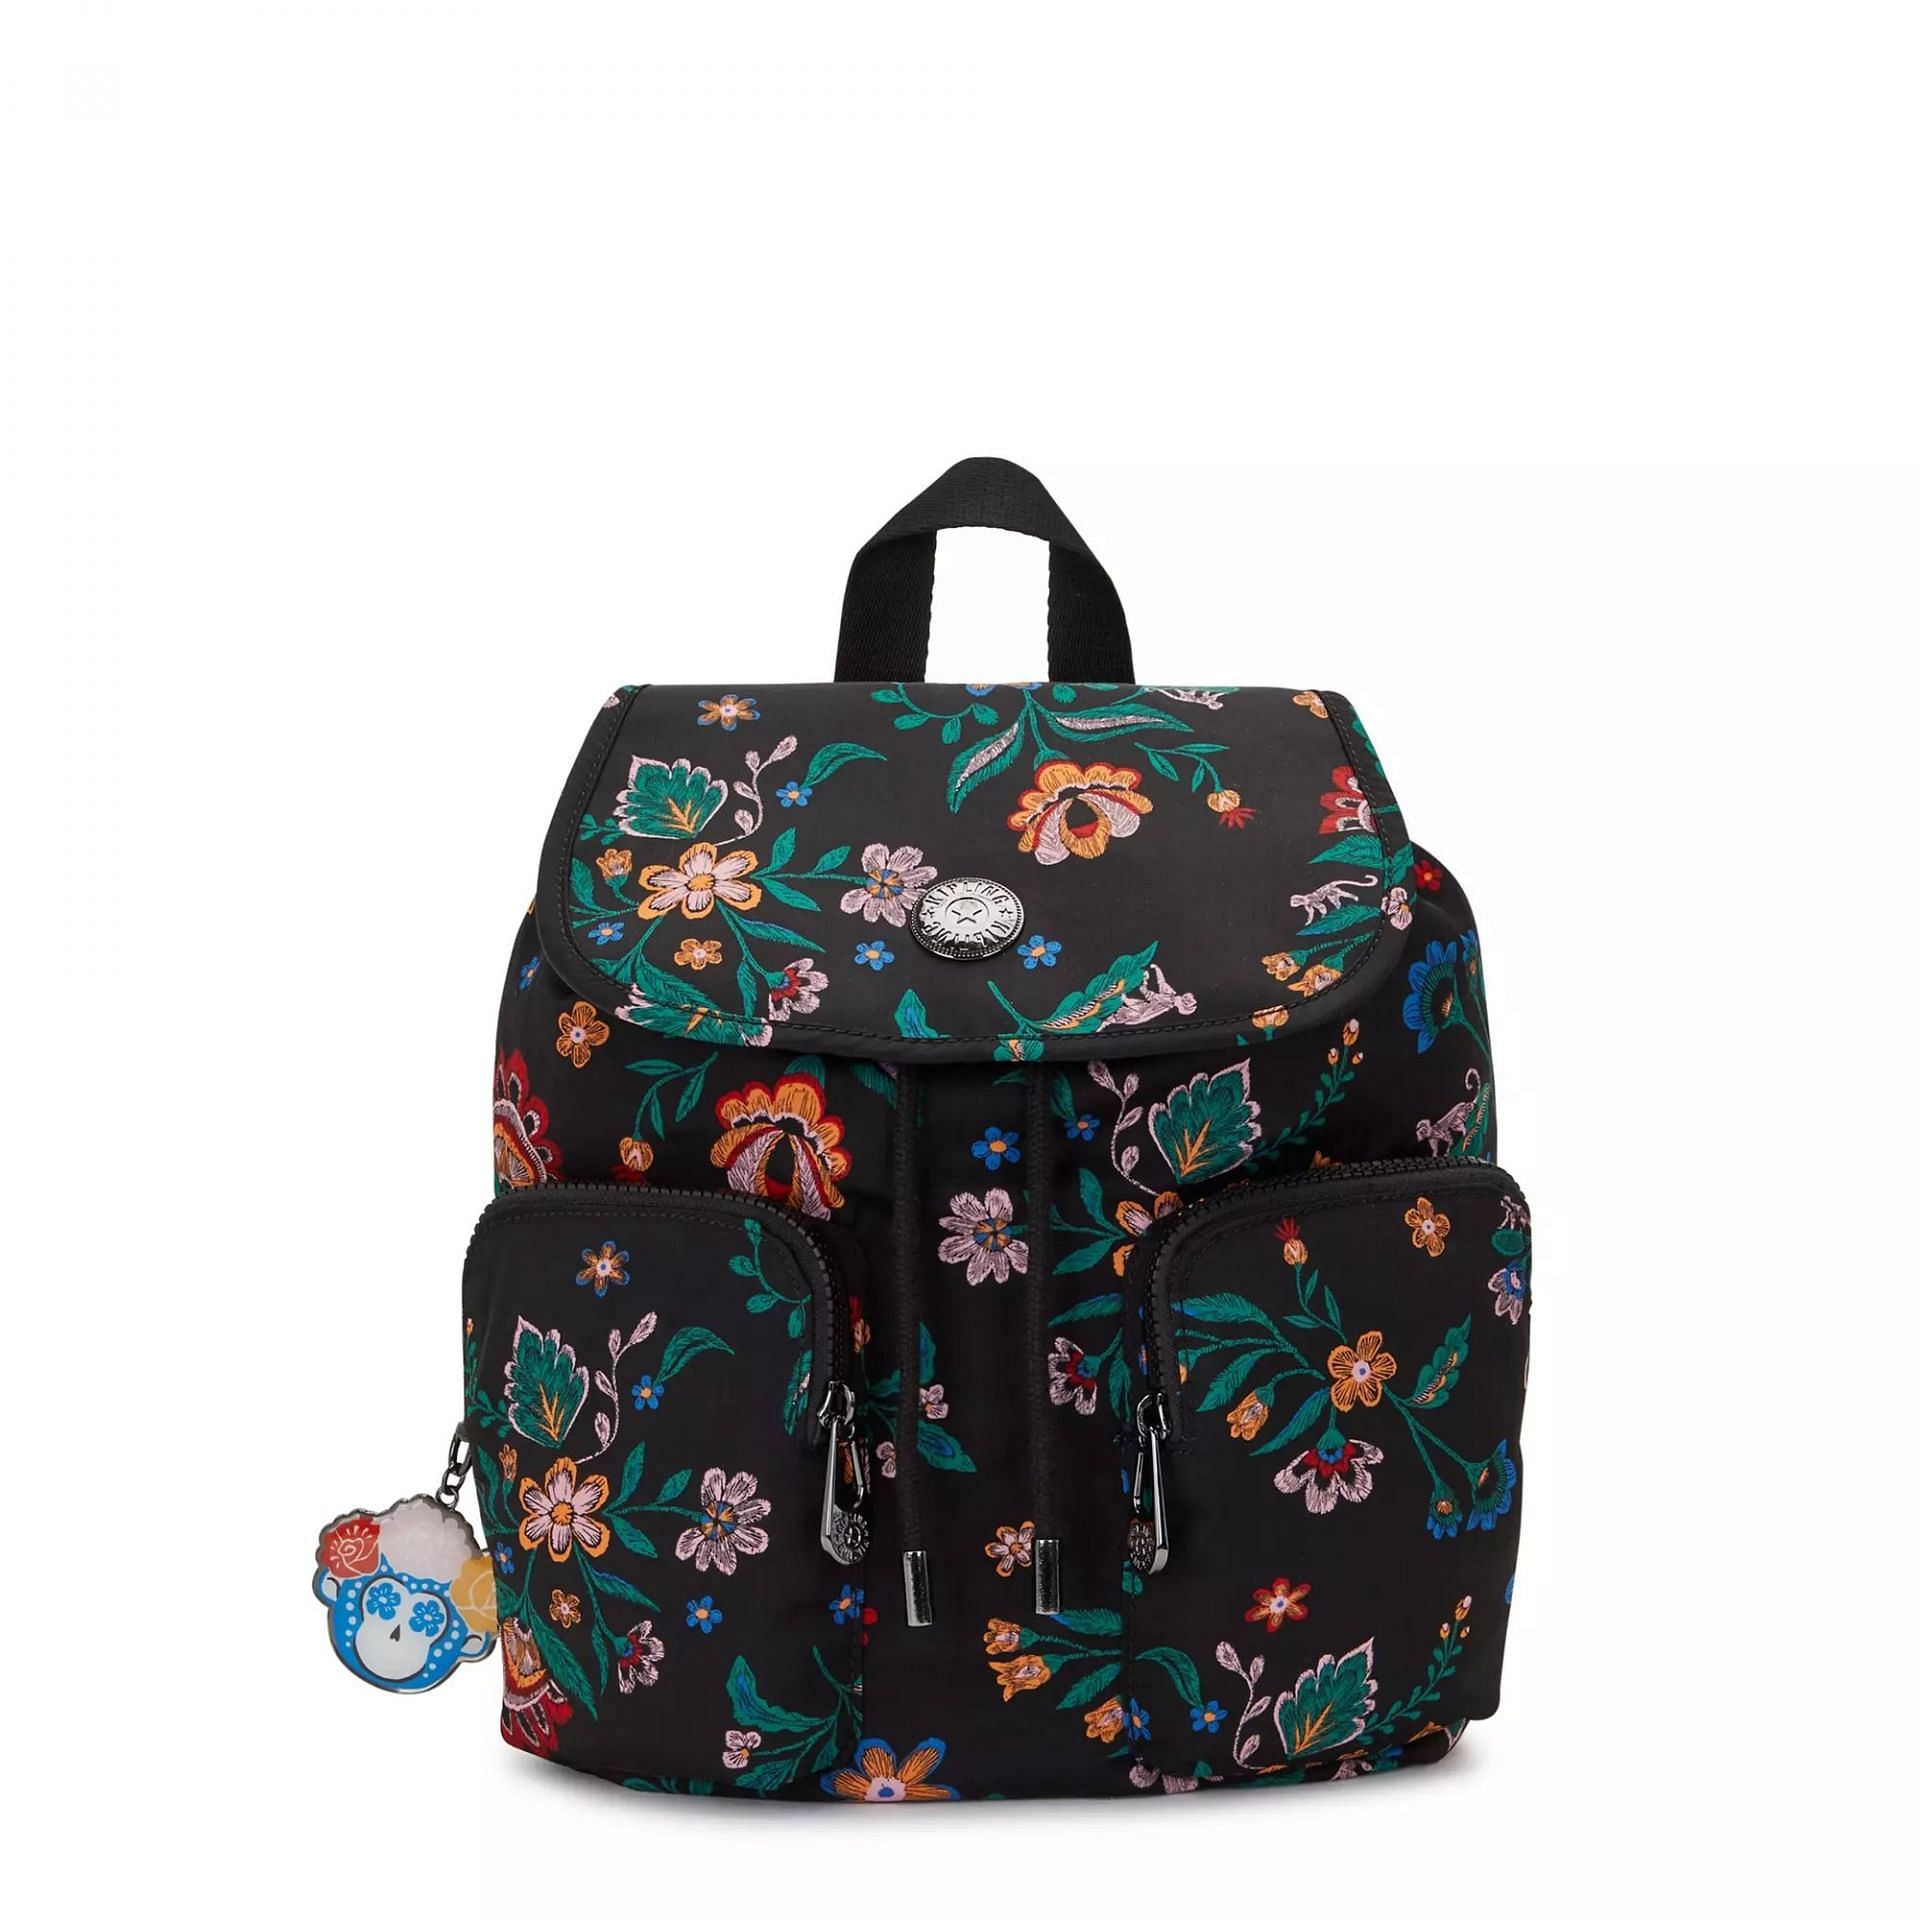 Kipling x Frida Kahlo collection: Where to get, price, and more details ...